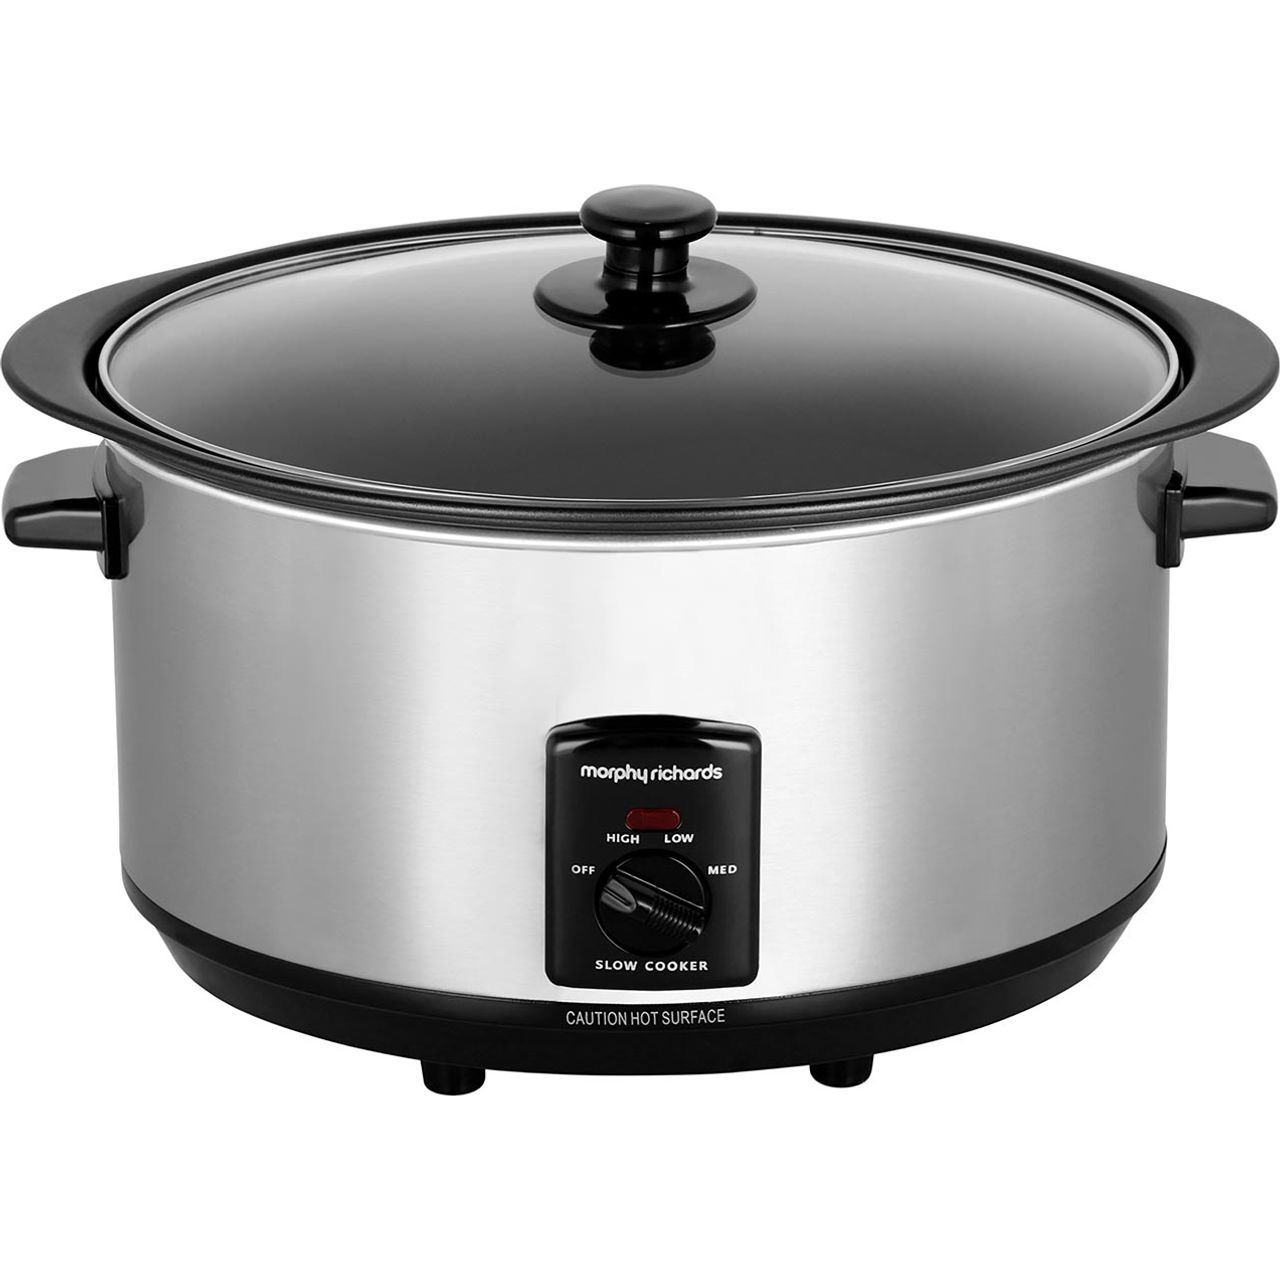 Morphy Richards Sear And Stew 48705 6.5 Litre Slow Cooker Review